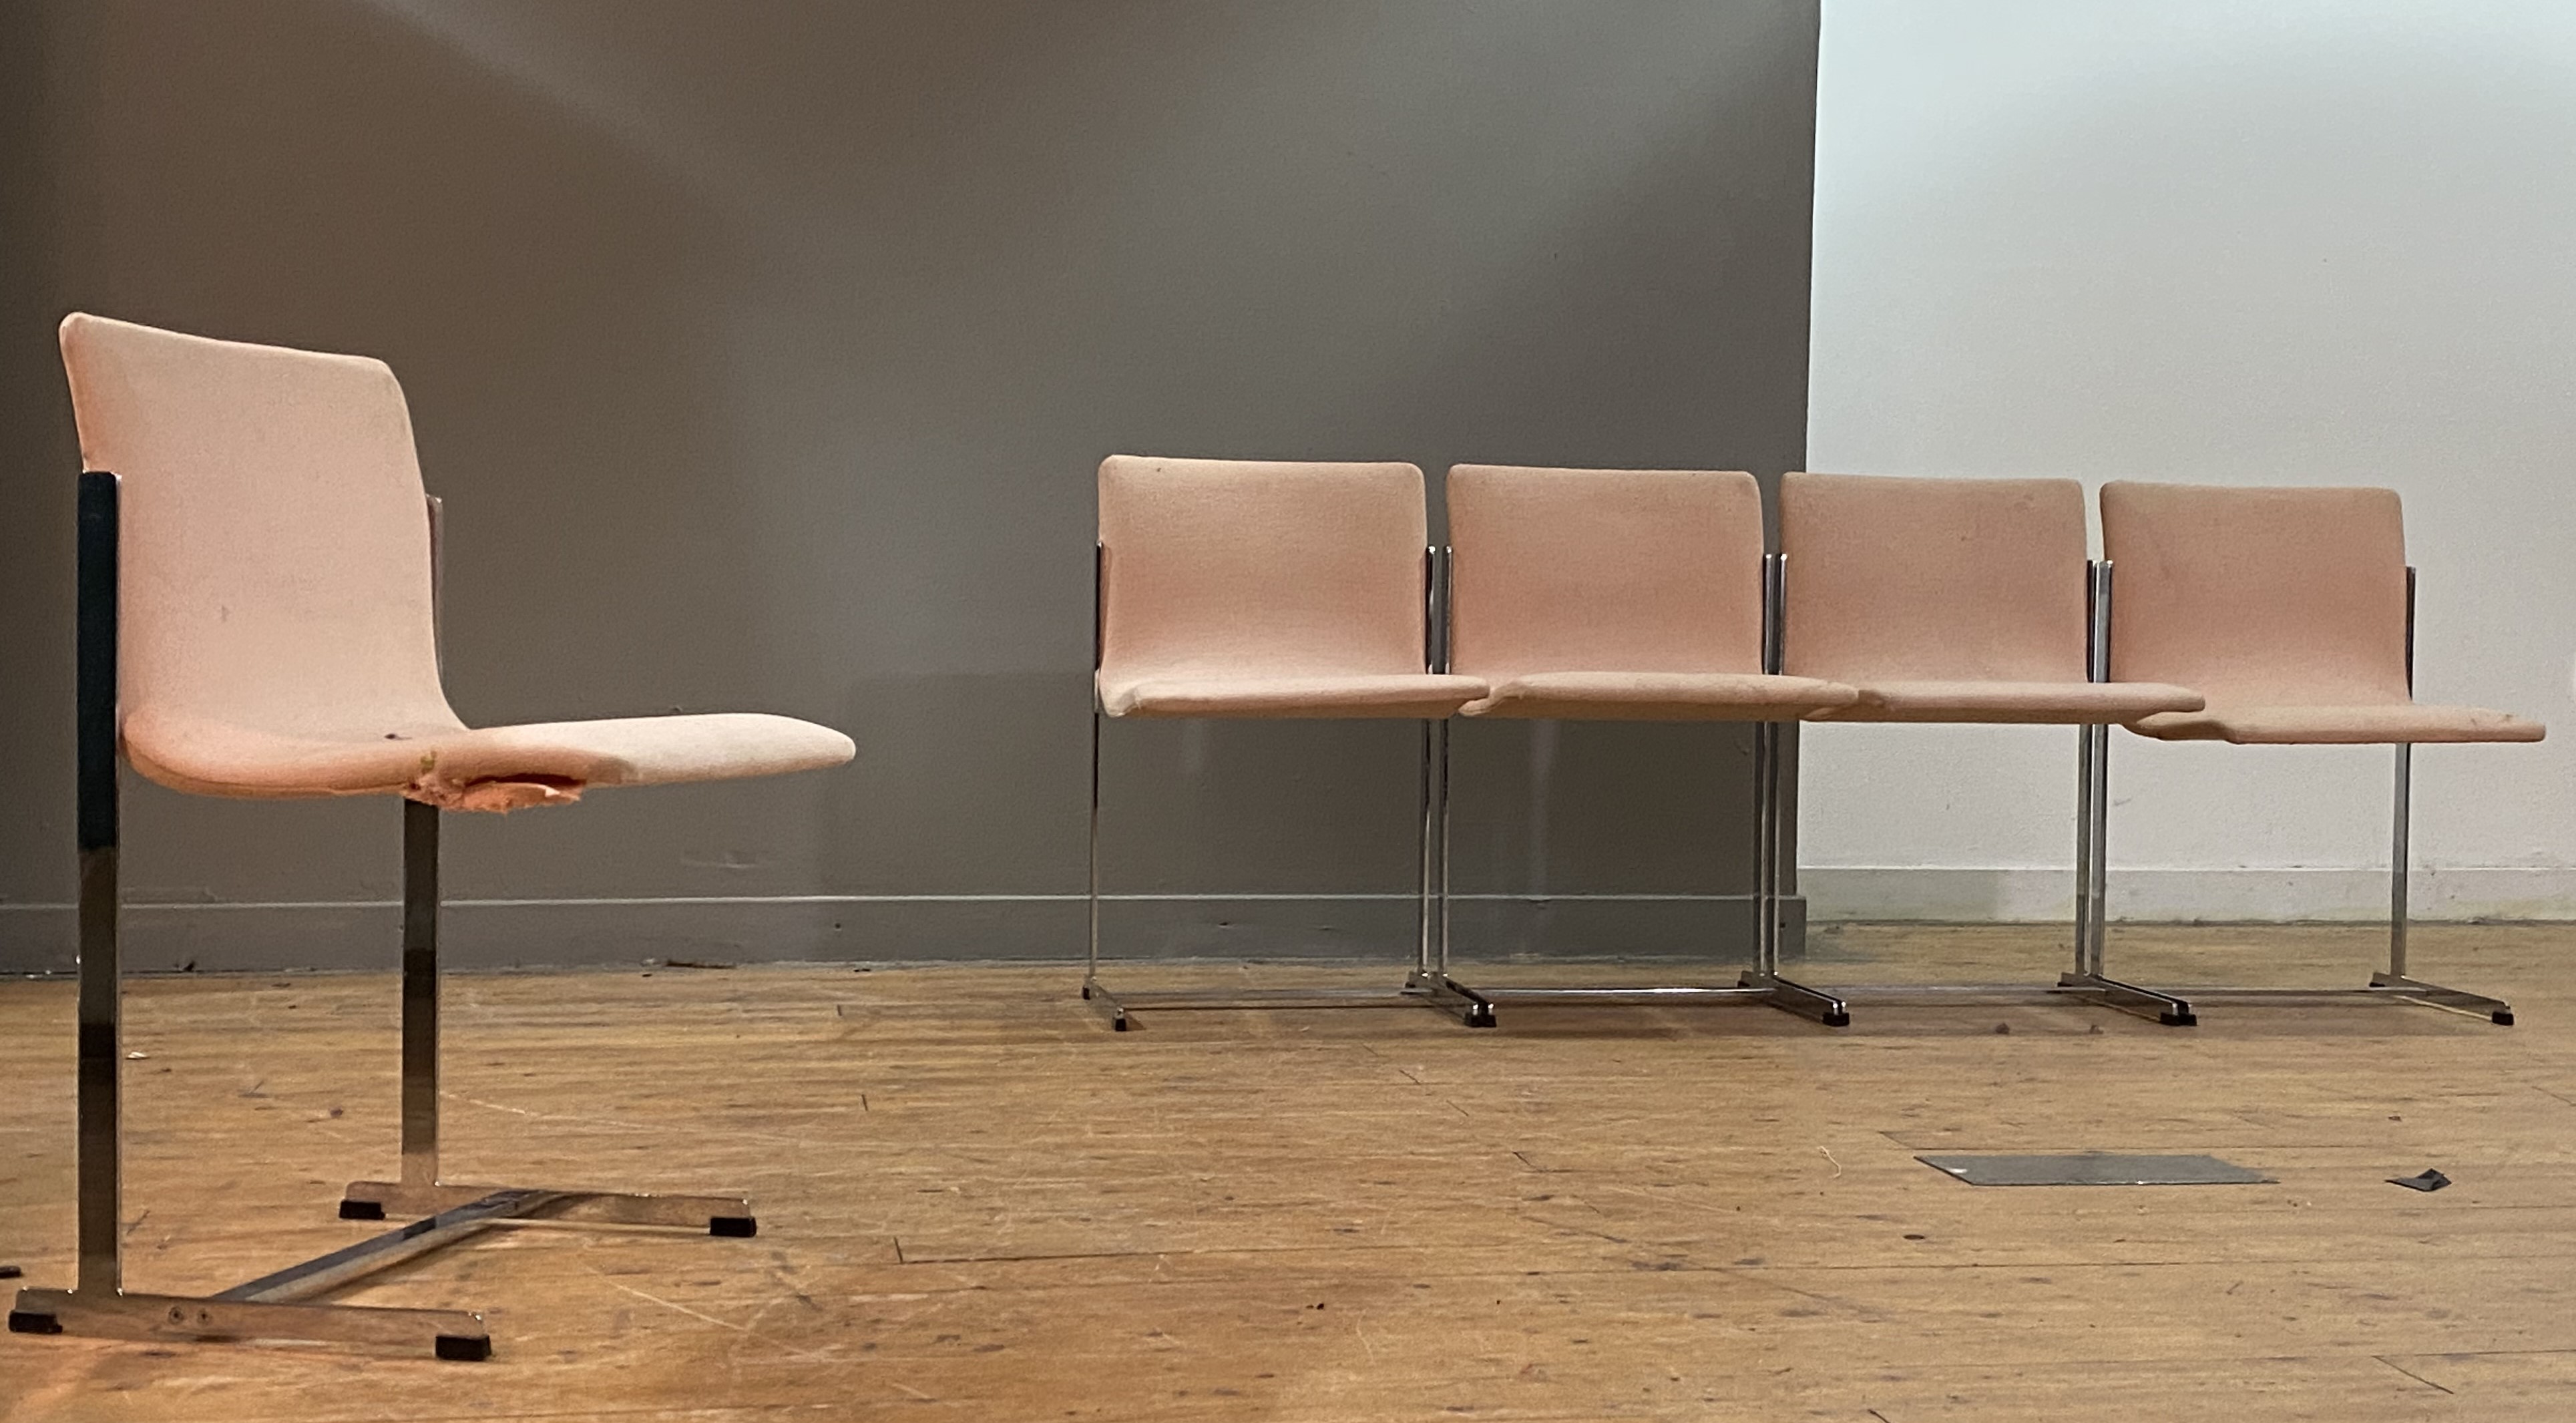 Merrow Associates, a set of five 1970's dining chairs, the upholstered seat and back raised on